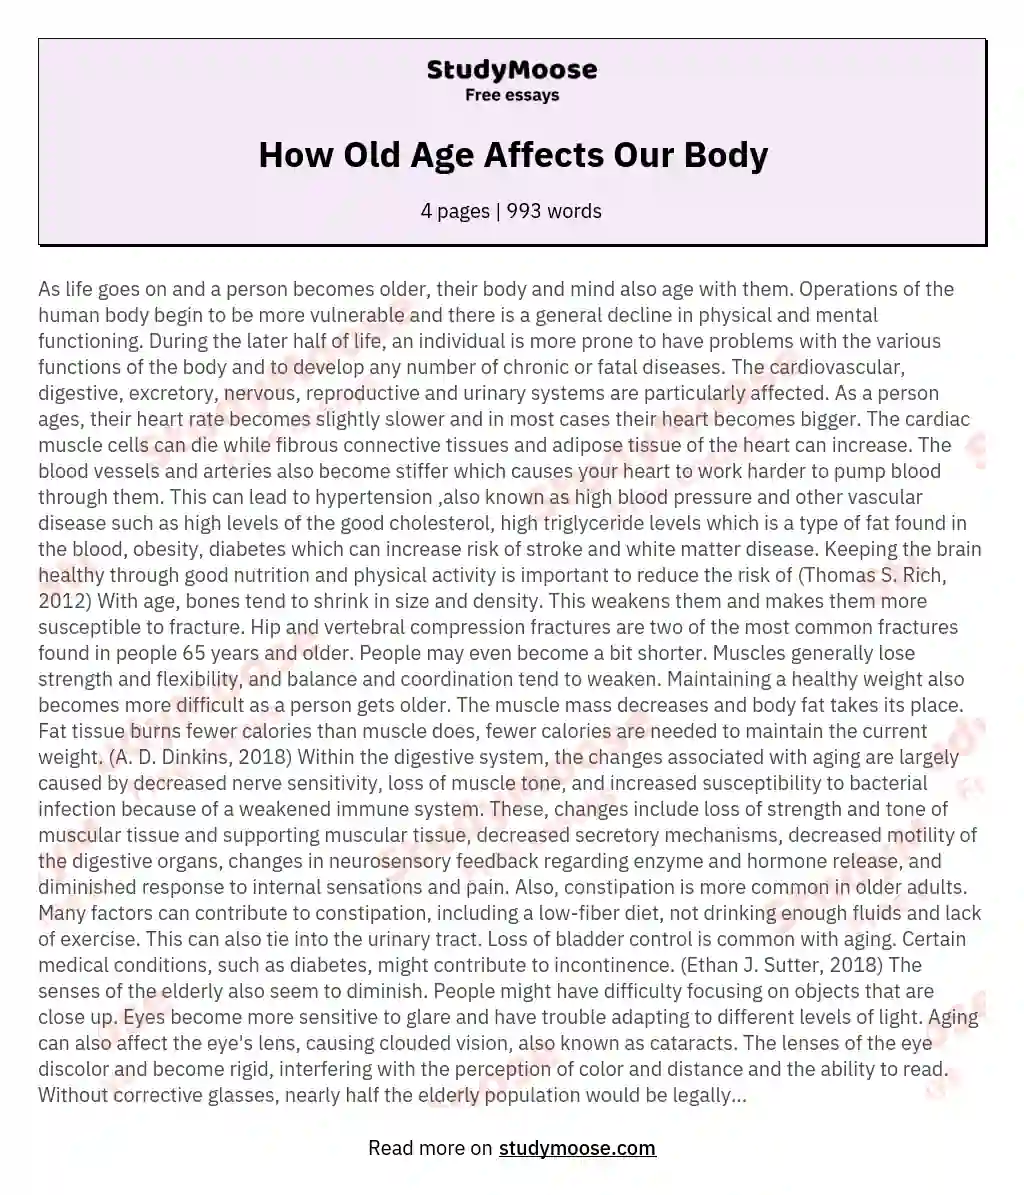 How Old Age Affects Our Body essay